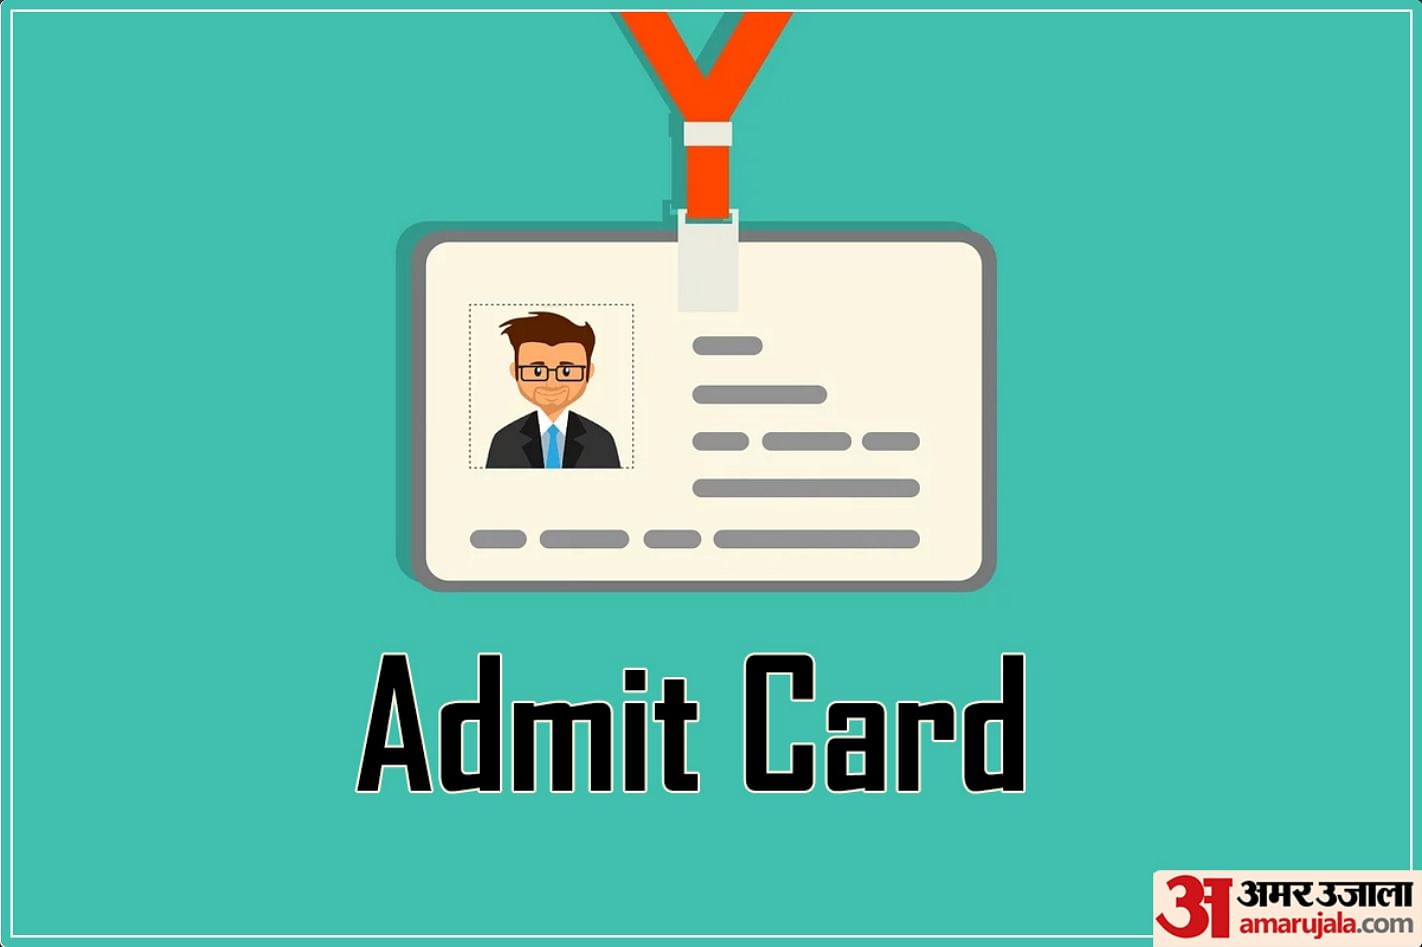 Bihar Police Driver Constable Admit Card 2019 Out, Here’s How to Check